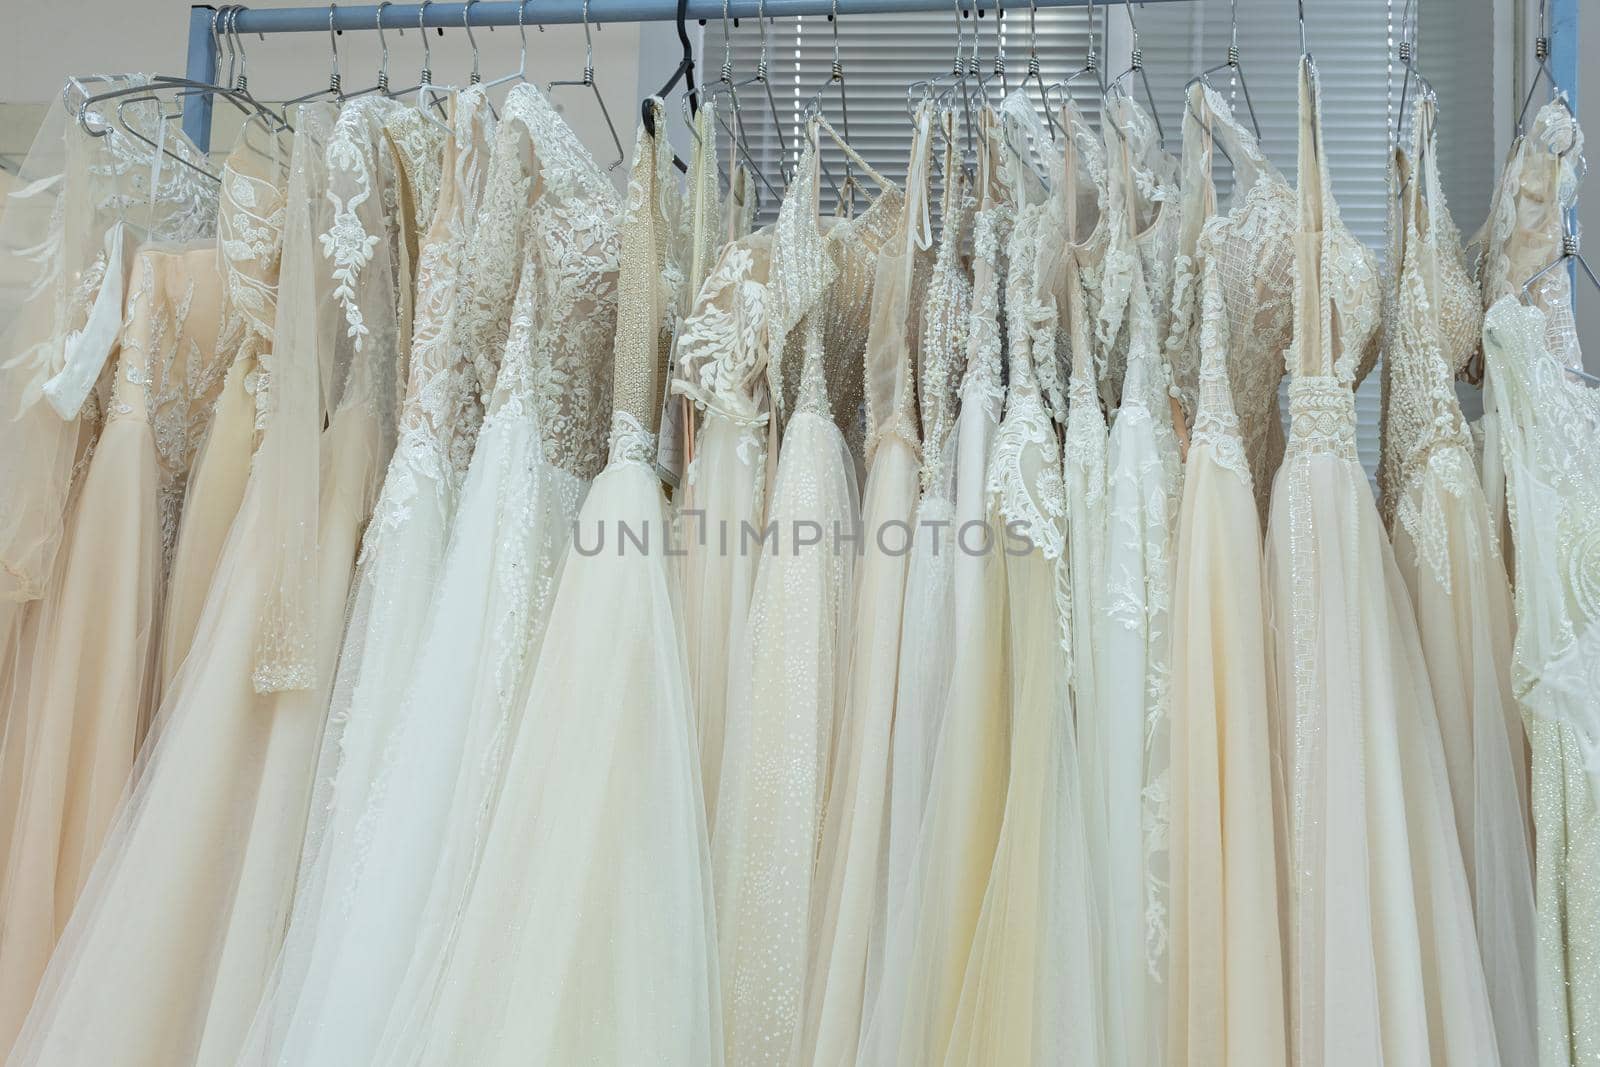 White and cream wedding dresses on a hanger in a bridal boutique. Close up by Serhii_Voroshchuk